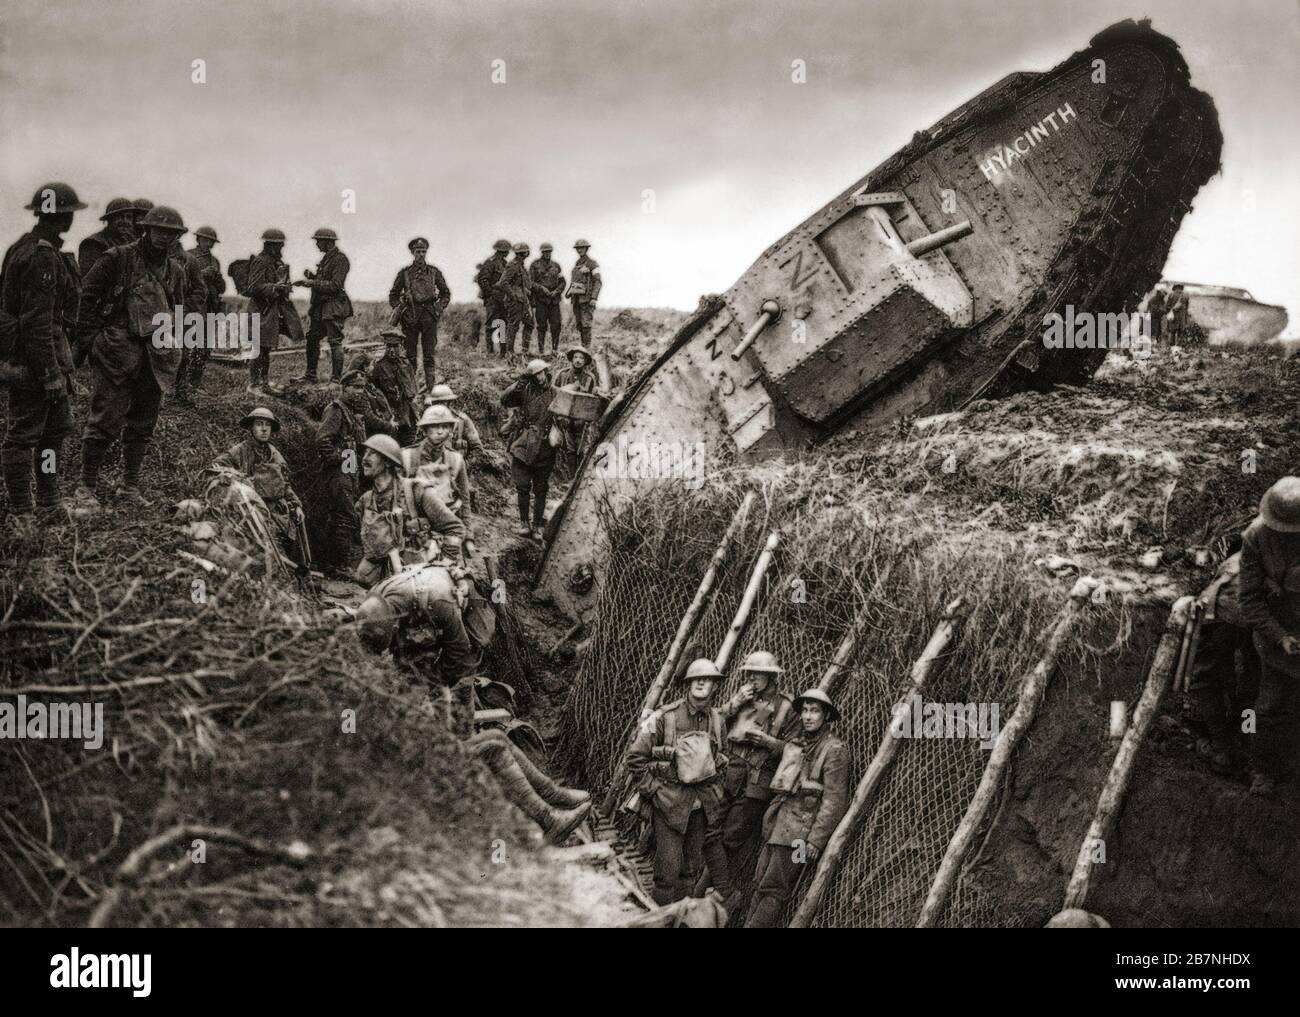 Soldiers from the Leicestershire Regiment gather around a British tank stuck in over-ran German trenches, during the Third Battle of Ypres aka the Battle of Passchendaele, a campaign of the First World War, that took place on the Western Front, from July to November 1917, for control of the ridges south and east of the Belgian city of Ypres in West Flanders. Stock Photo